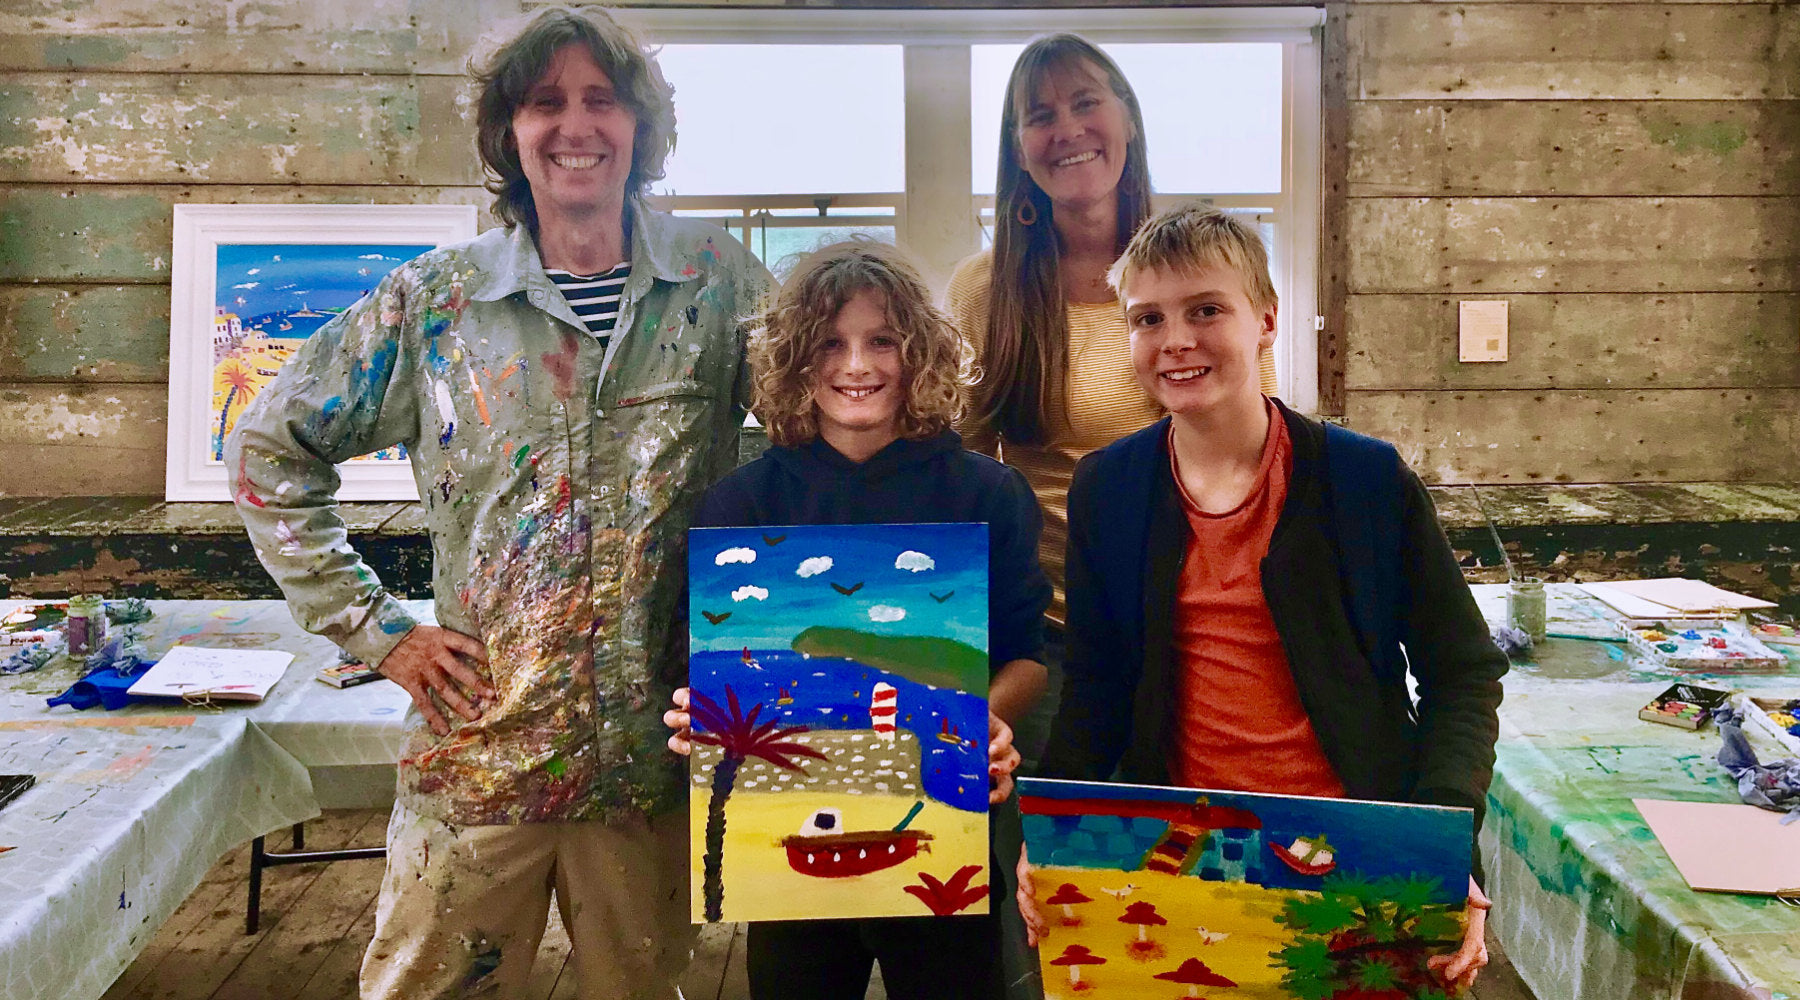 St Ives artists John Dyer & Joanne Short pictured in the Porthmeor Studios at the St Ives School of Painting with young artists Thomas and Benji during an art workshop. Photo courtesy of the parents.